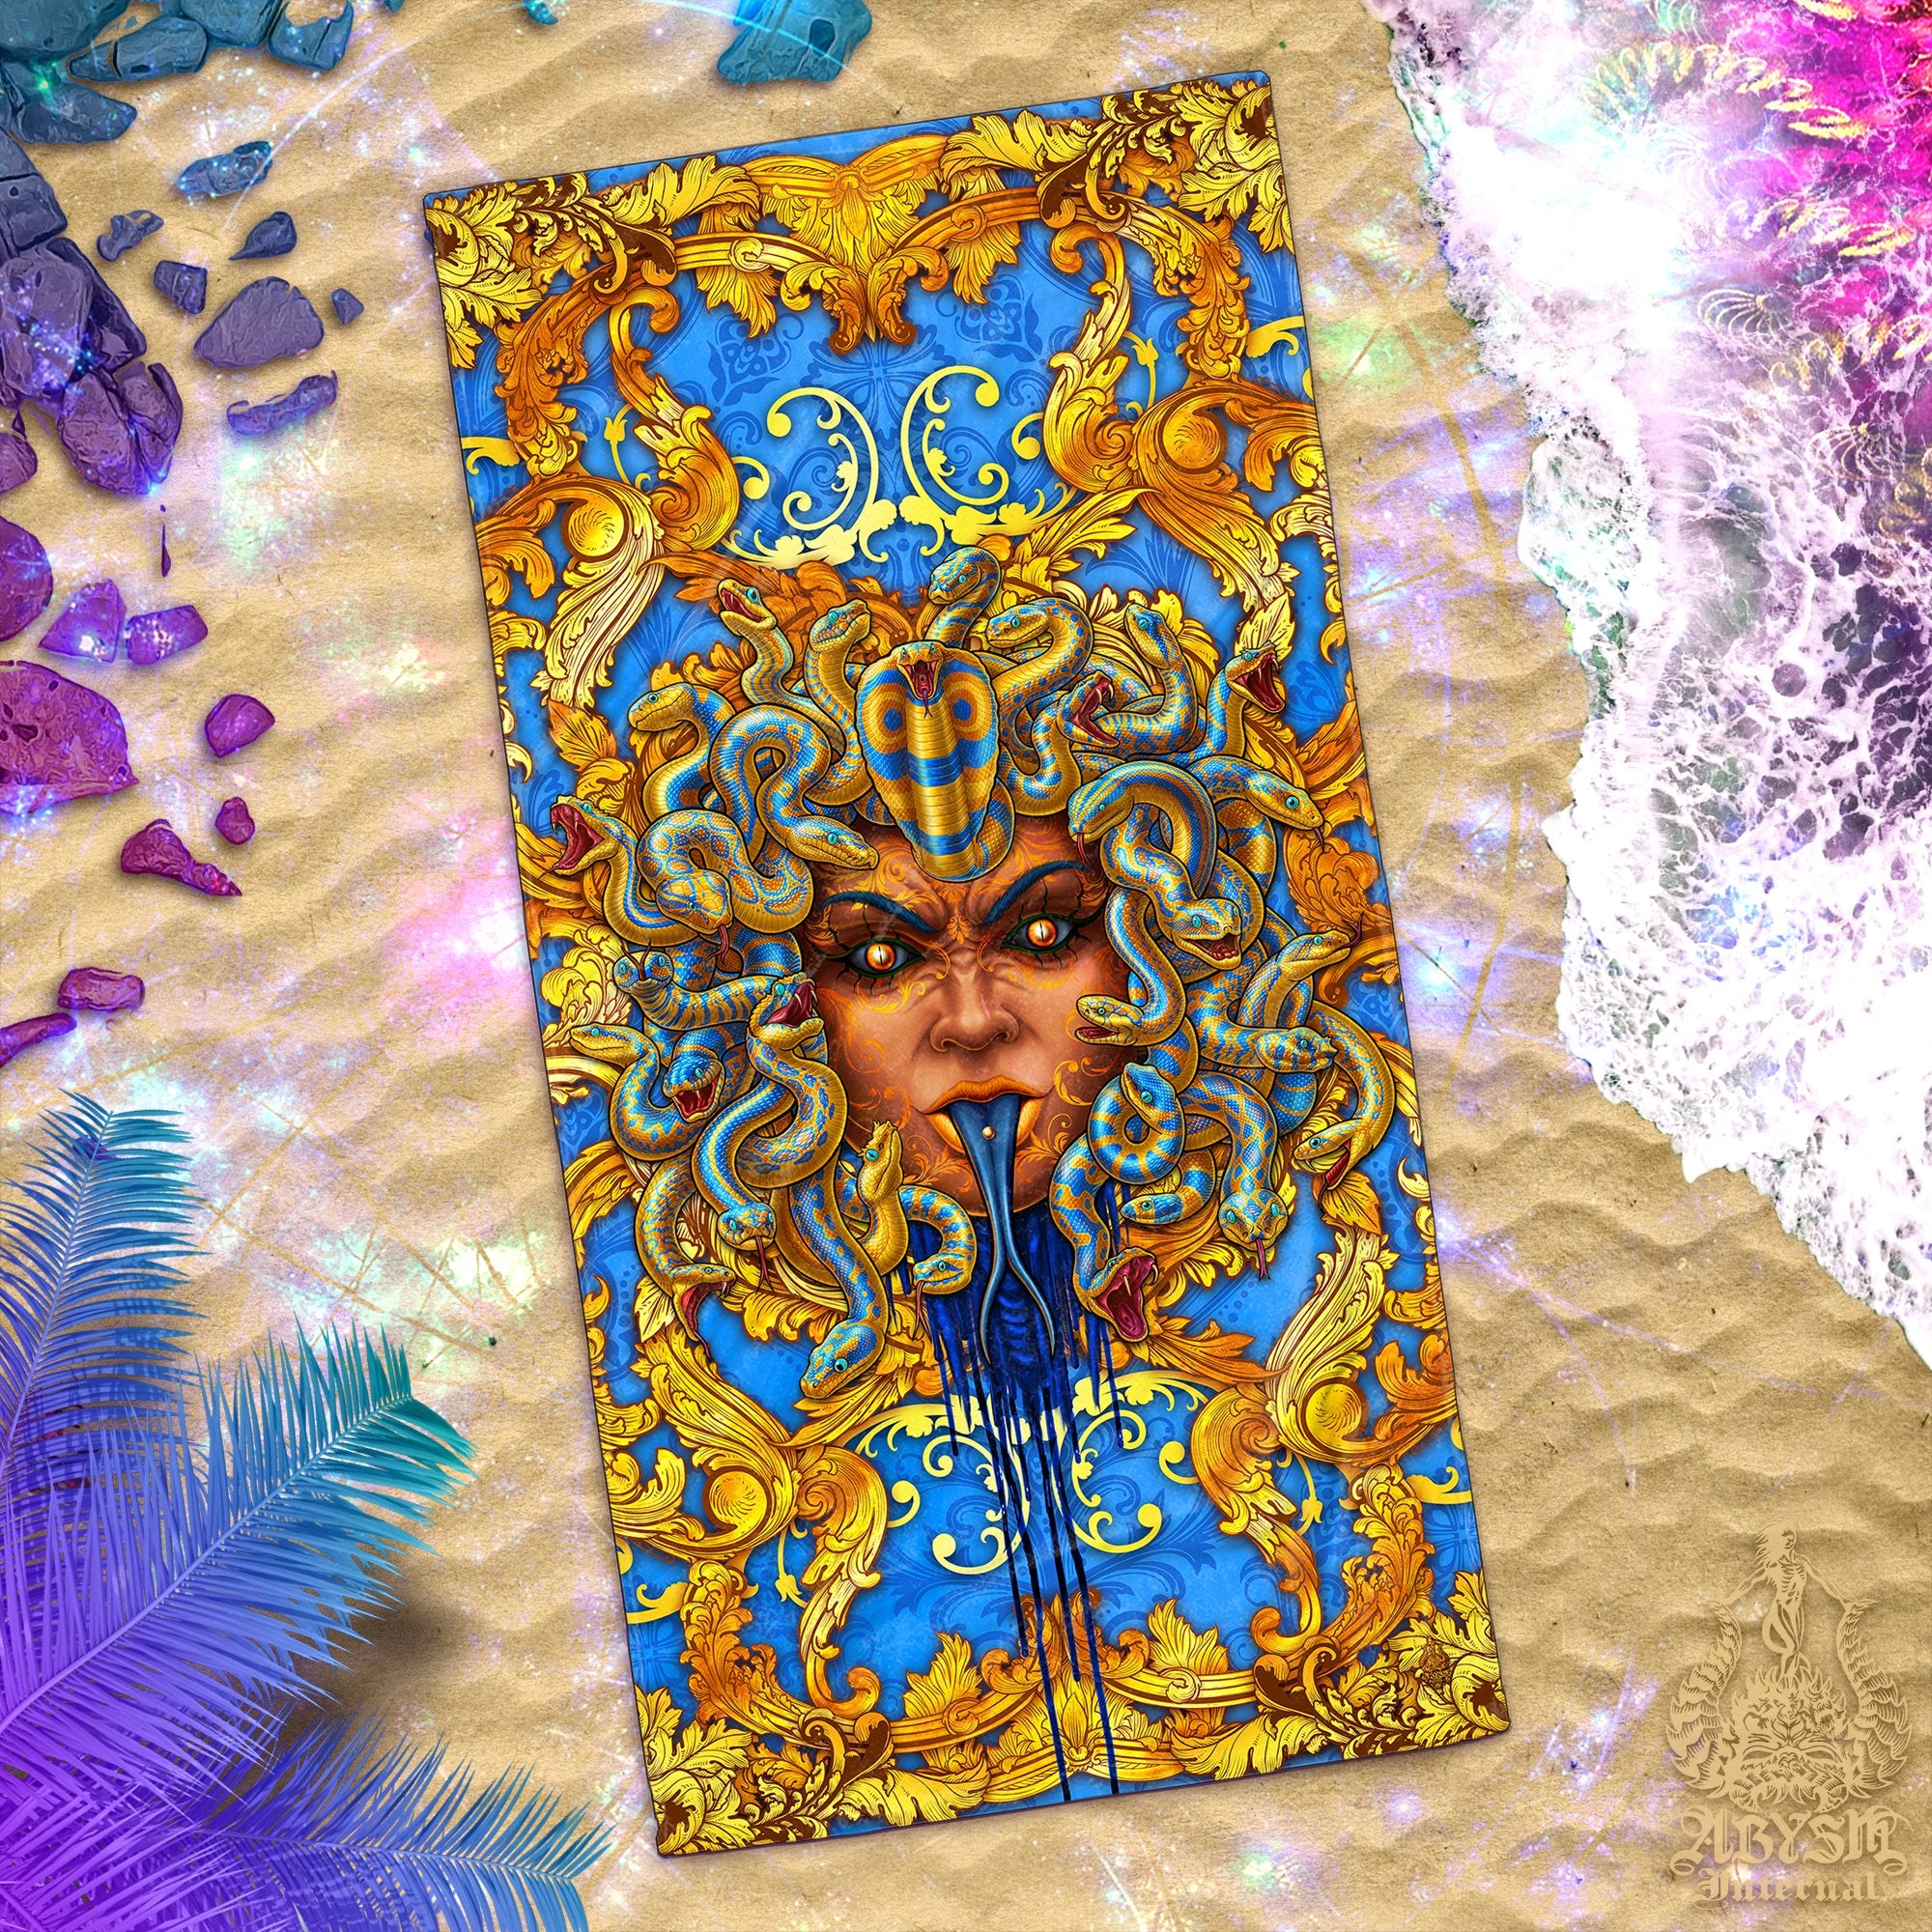 Psychedelic Beach Towel, Psy Medusa, Rave Snakes - Cyan, Gold, Nature, Ash, 4 Colors, Faces - Abysm Internal